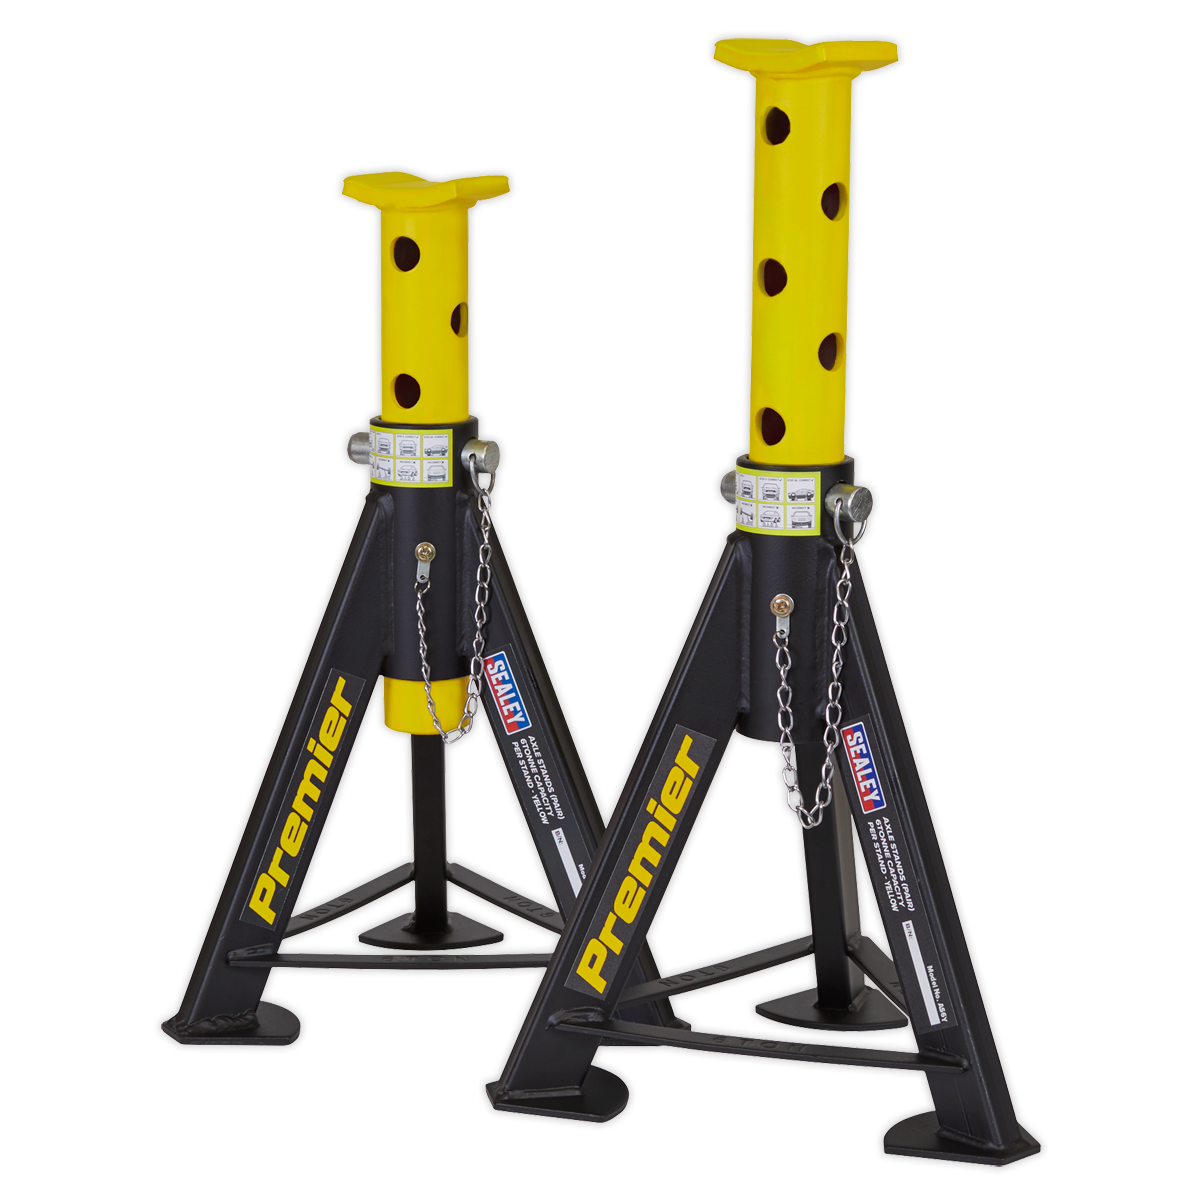 Sealey Axle Stands (Pair) 6 Tonne Capacity per Stand - Yellow